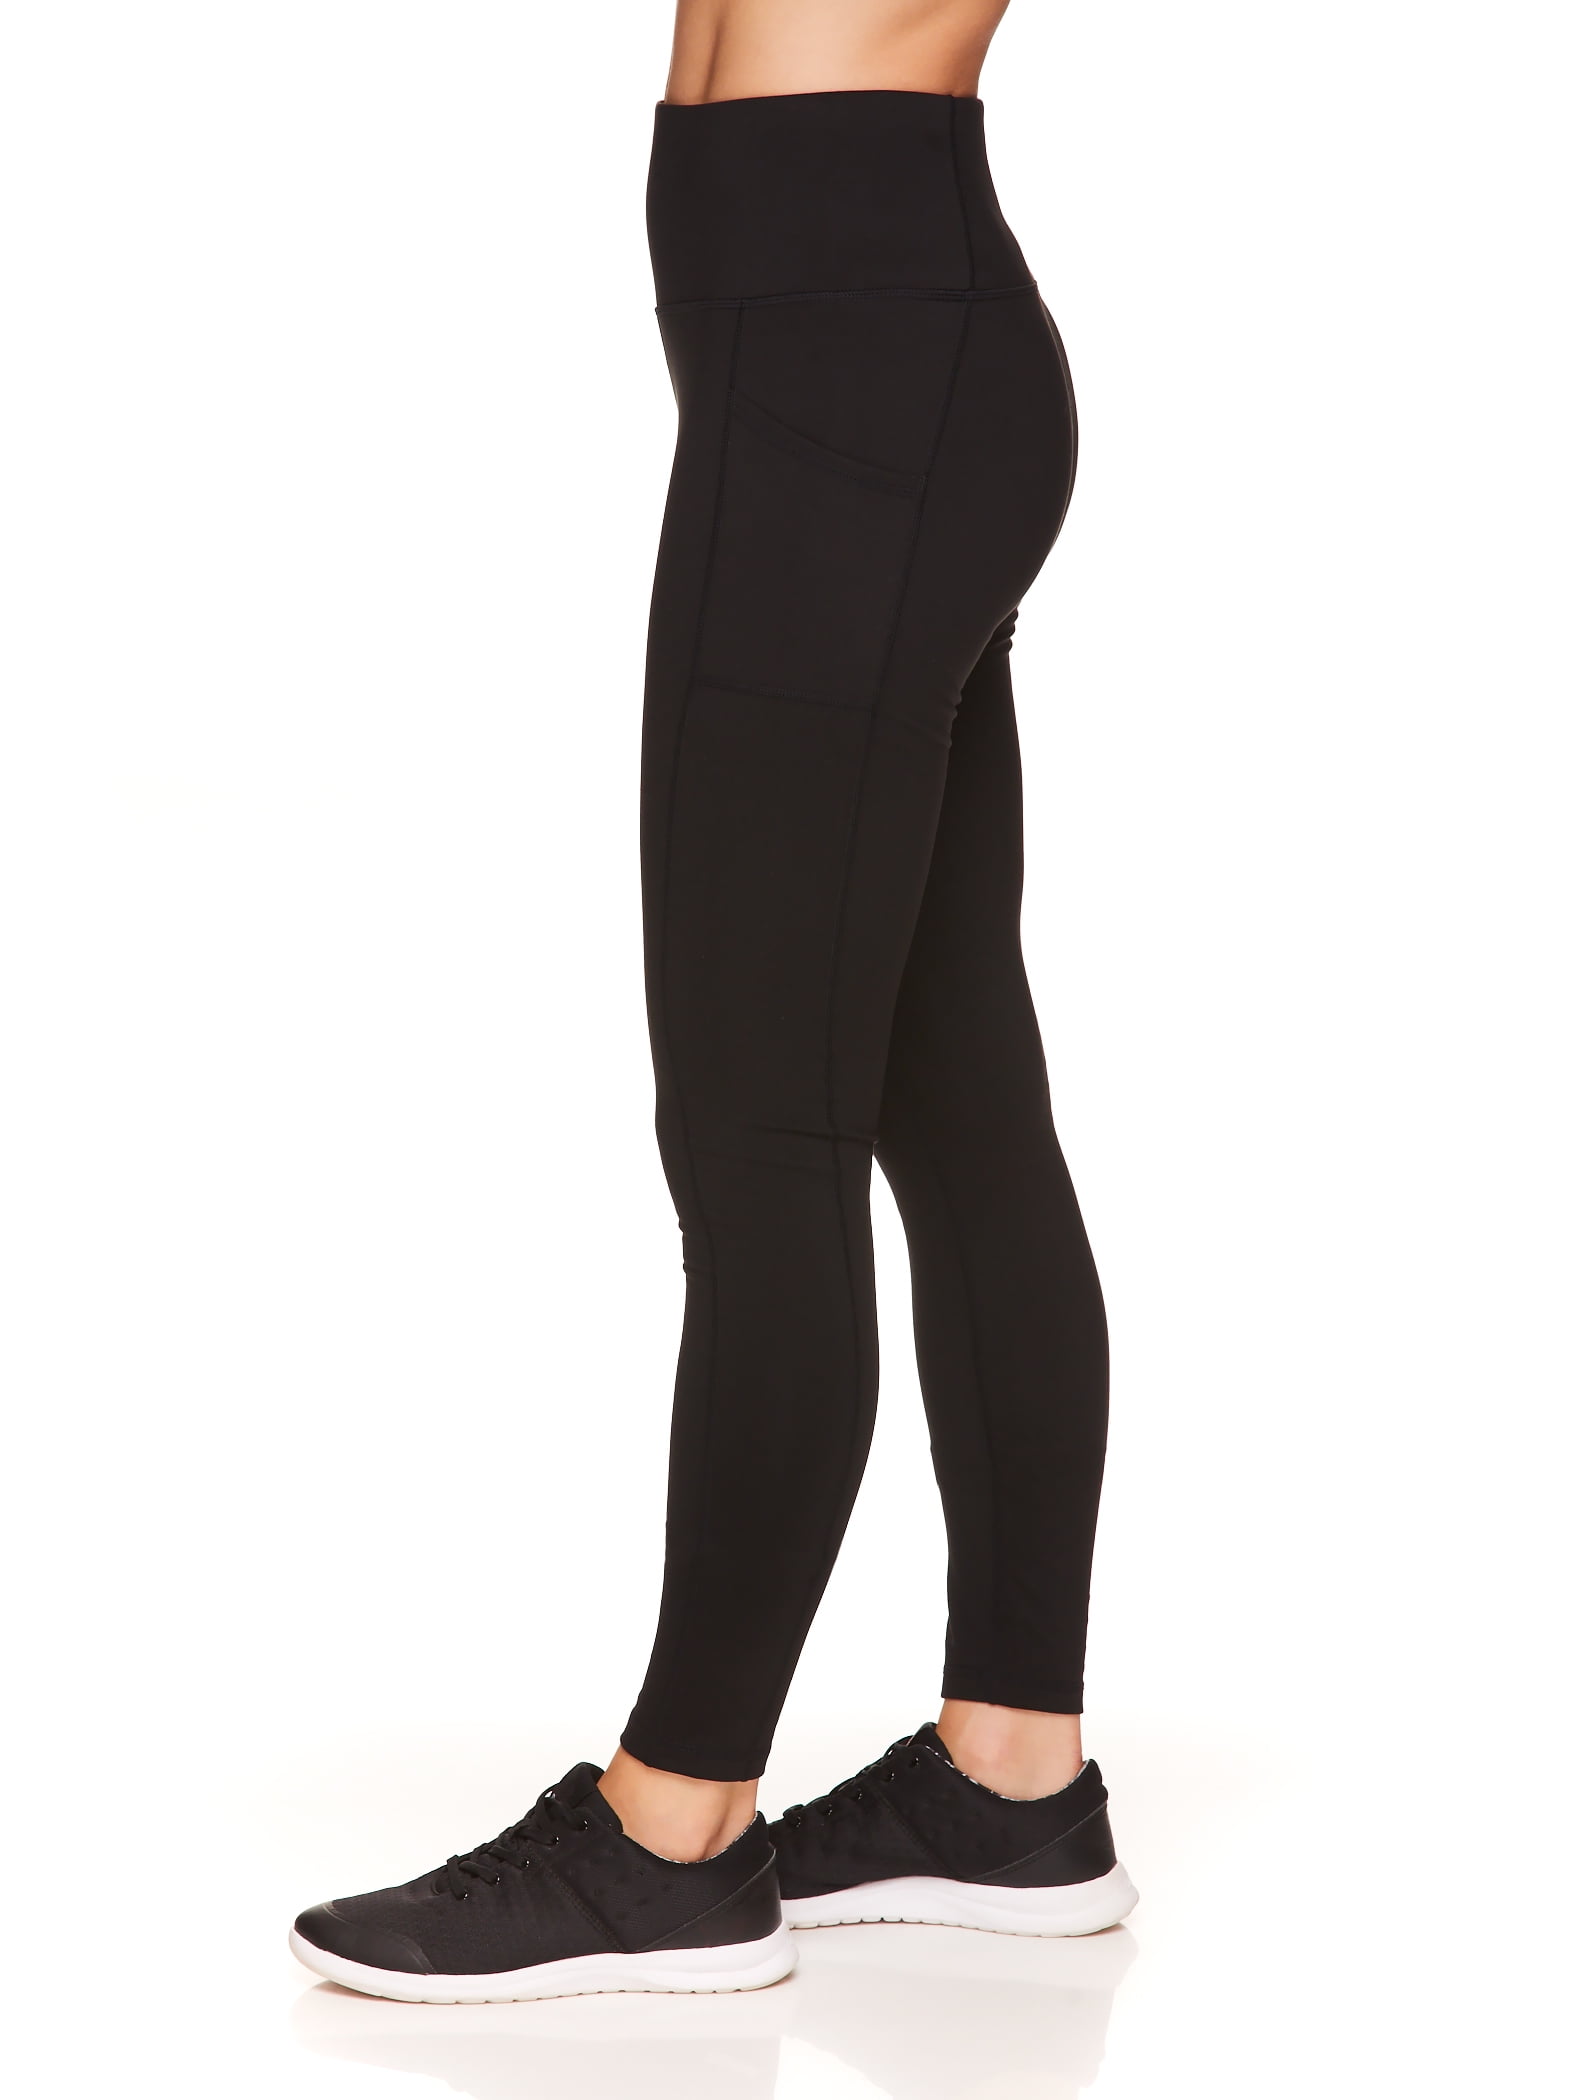 Reebok Women's Everyday High-Waisted Active Leggings with